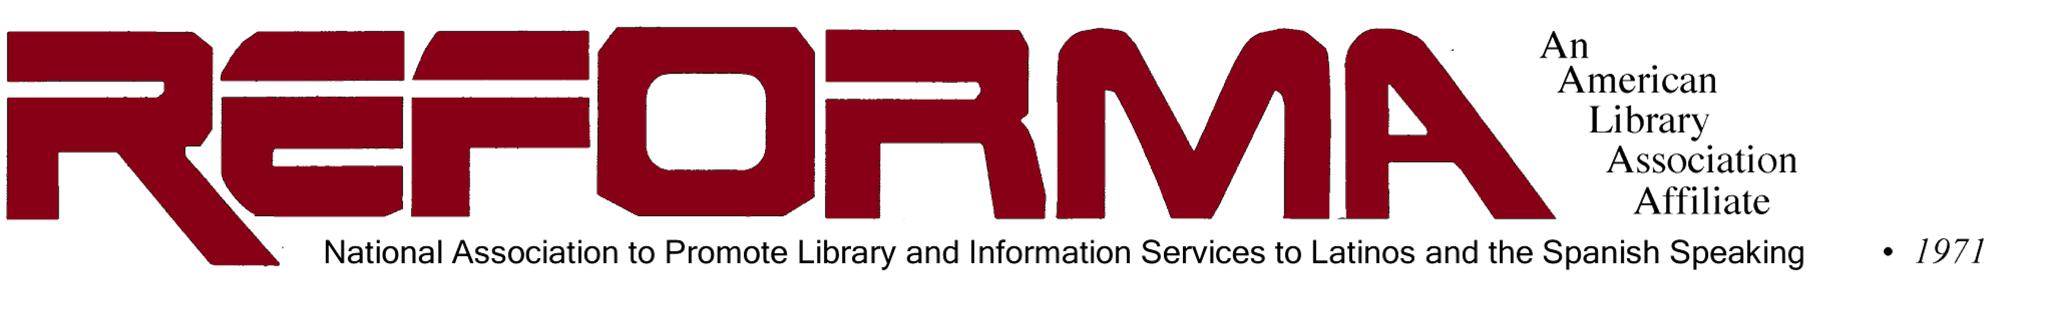 REFORMA: The National Association to Promote Library and Information Services to Latinos and the Spanish-Speaking, an American Library Association affiliate